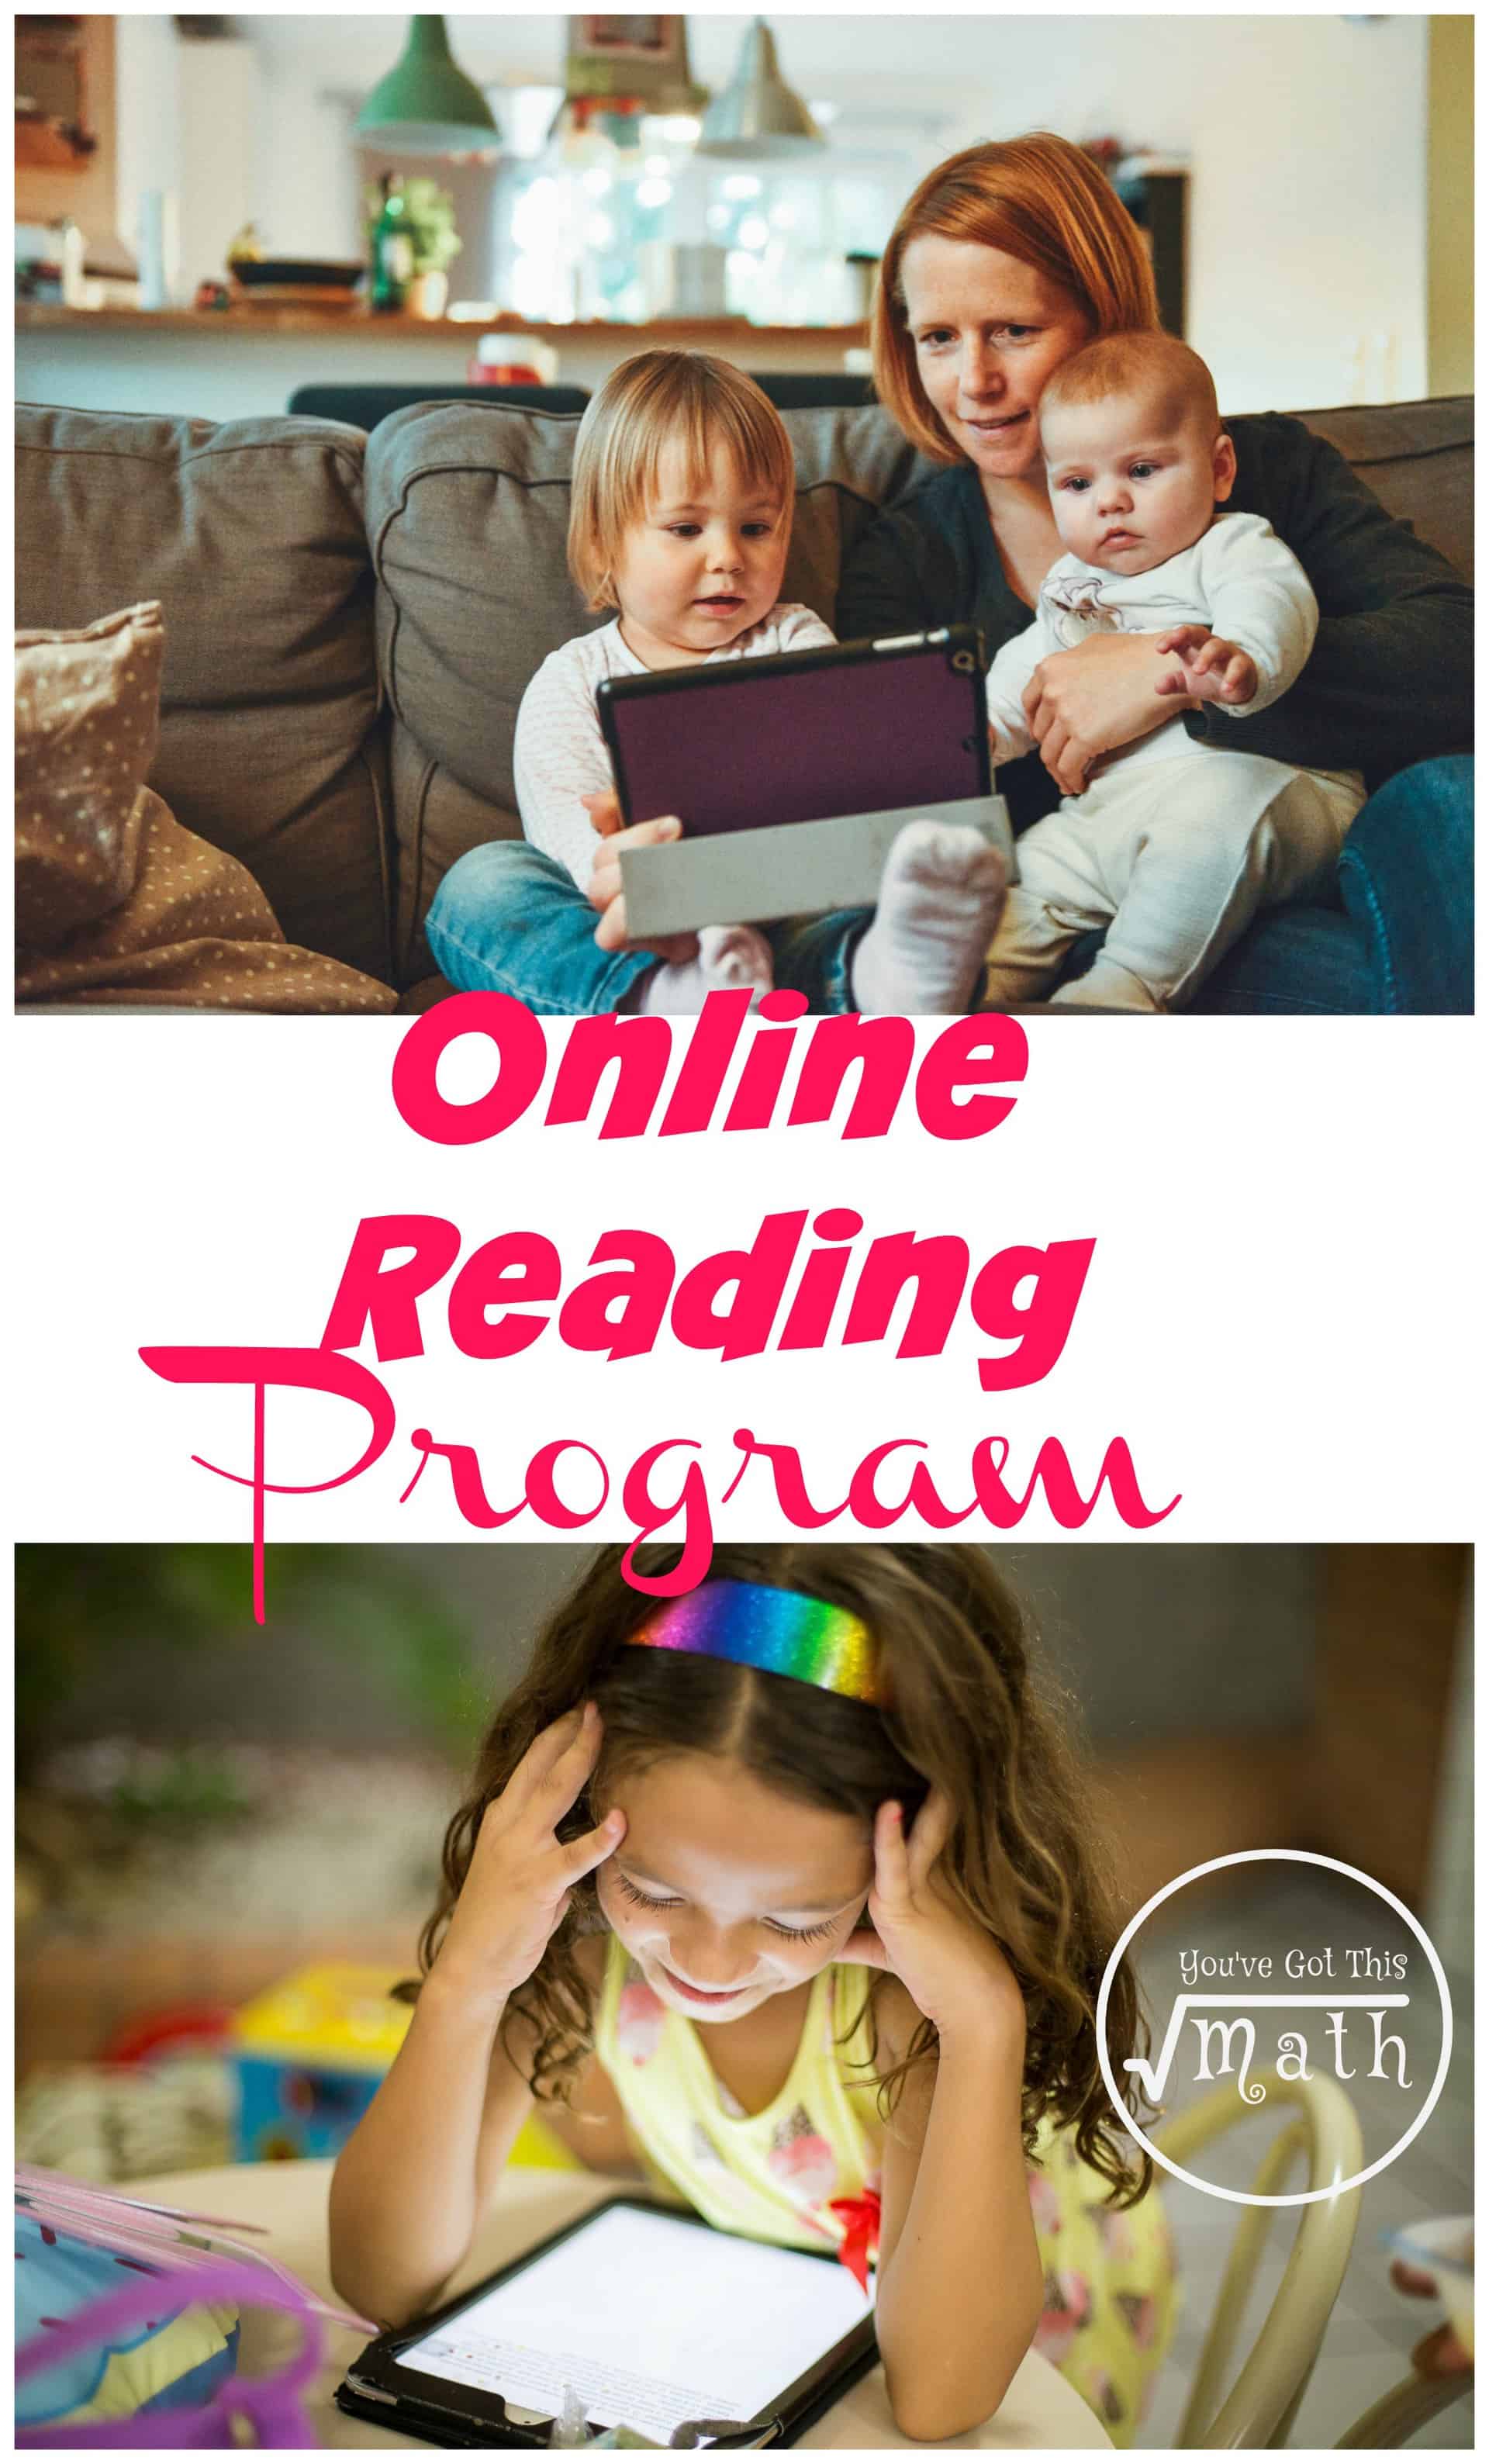 Where Can I Find A Quality Online Reading Program?